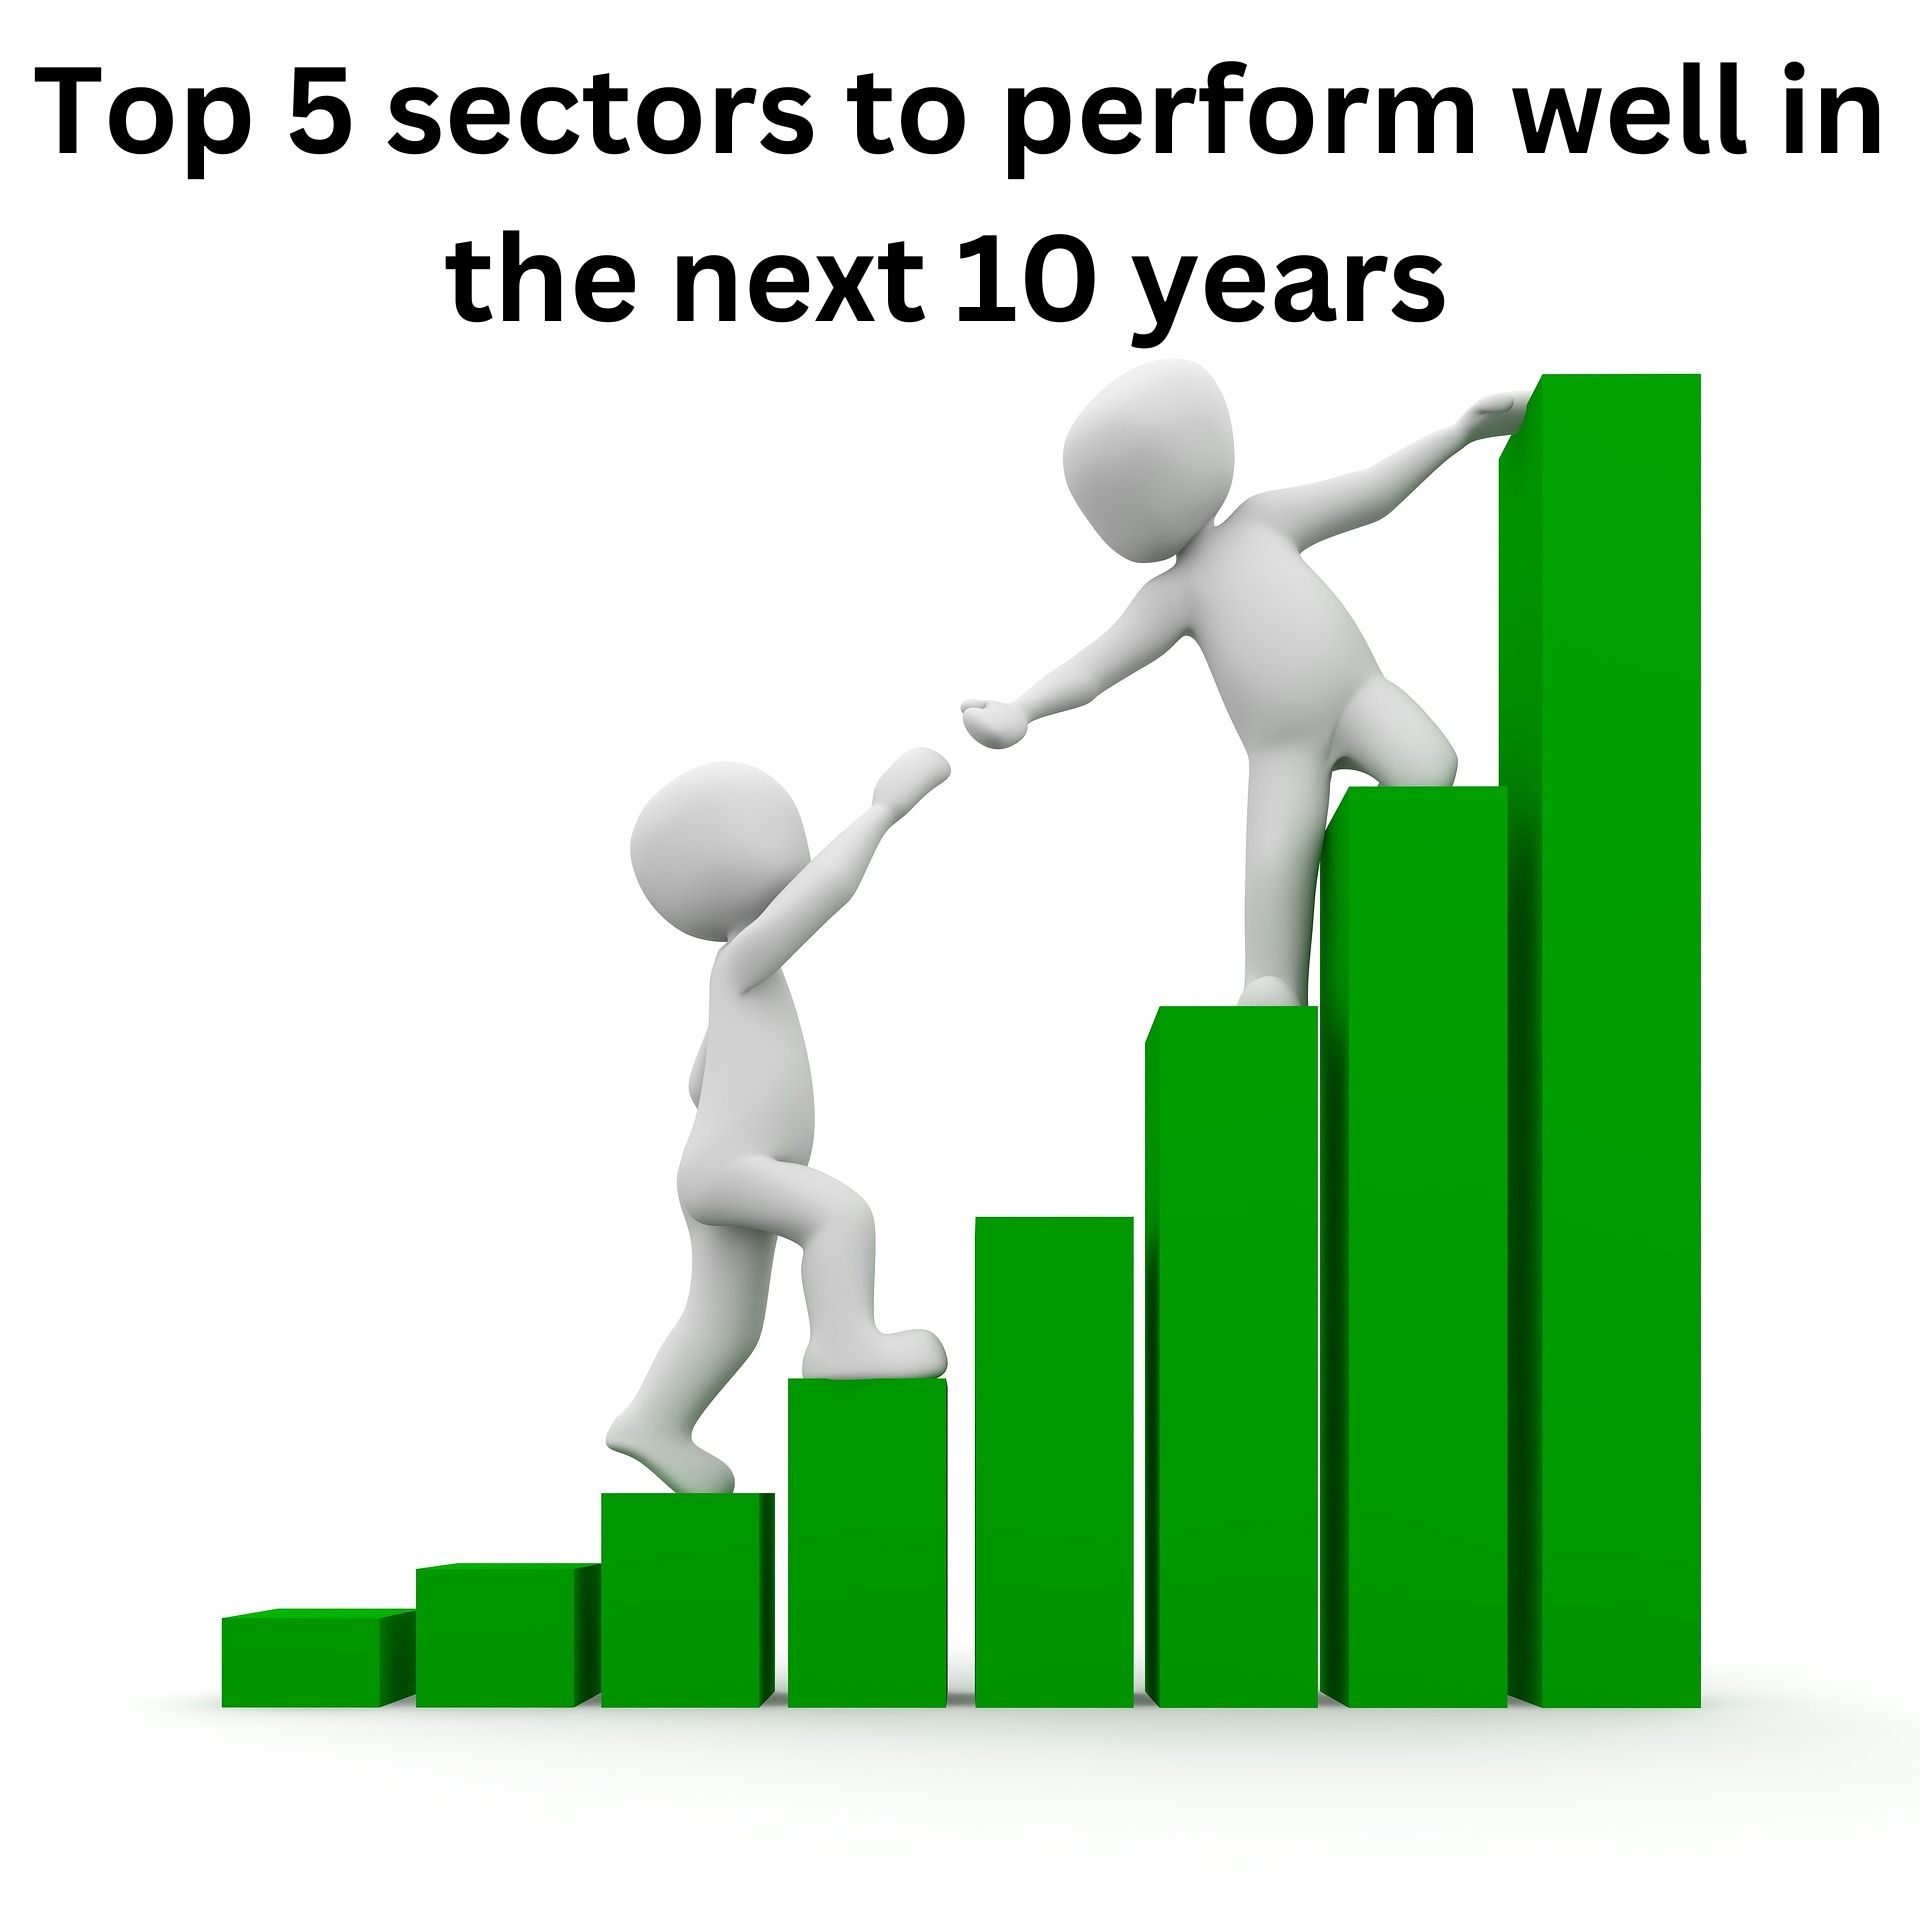 Top 5 sectors to perform well in the next 10 years 